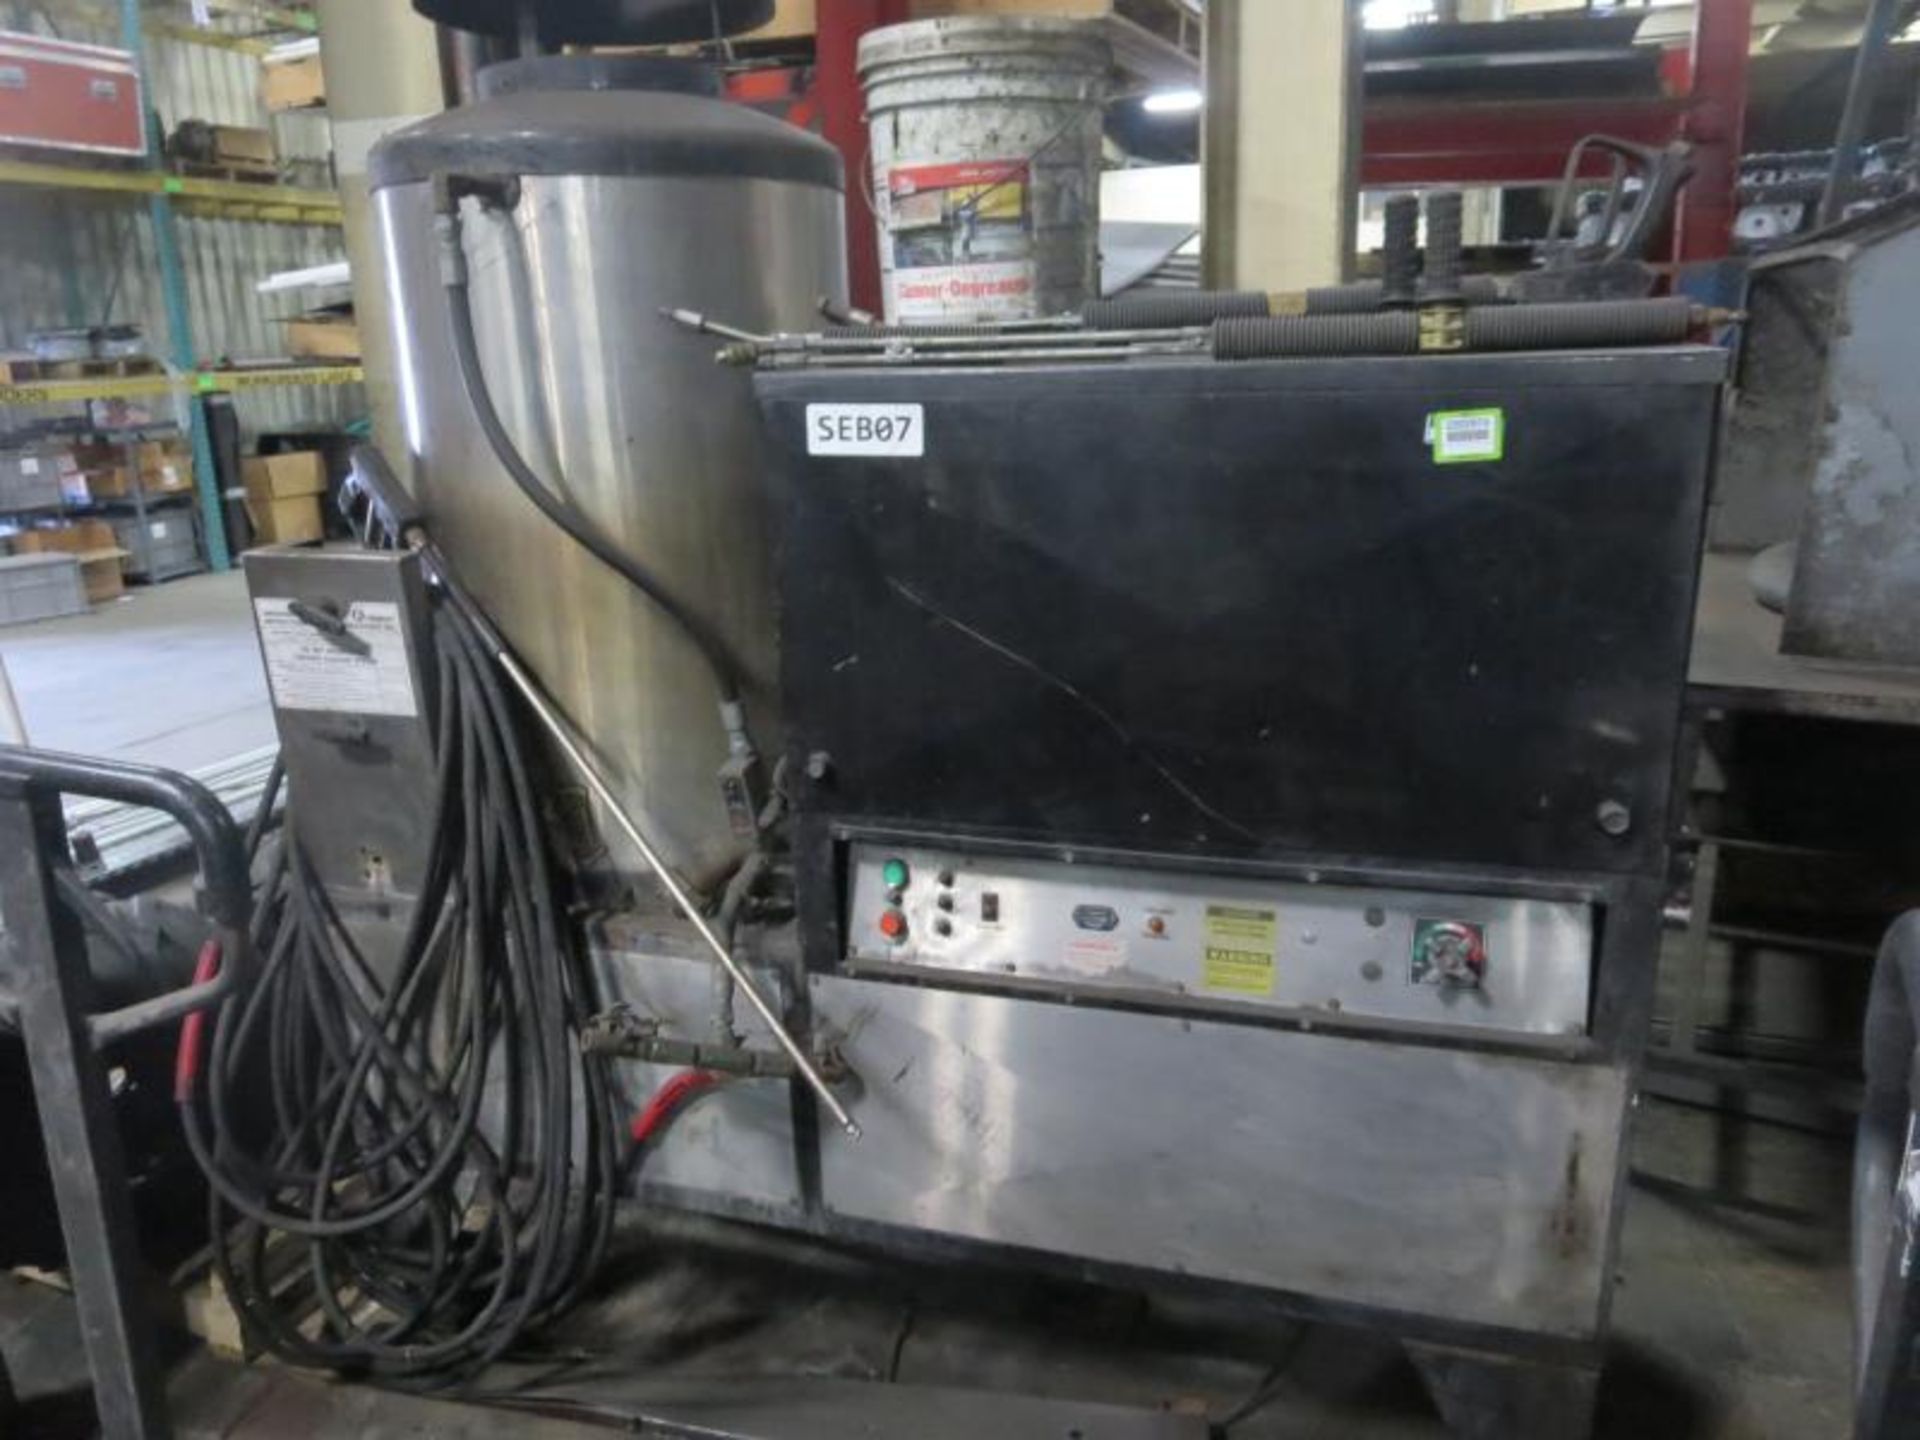 Fremont Phosphate Steam Cleaner, Approx. 3000psi. Hit # 2202974. Bldg. 1 O.S. Maint Shop. Asset